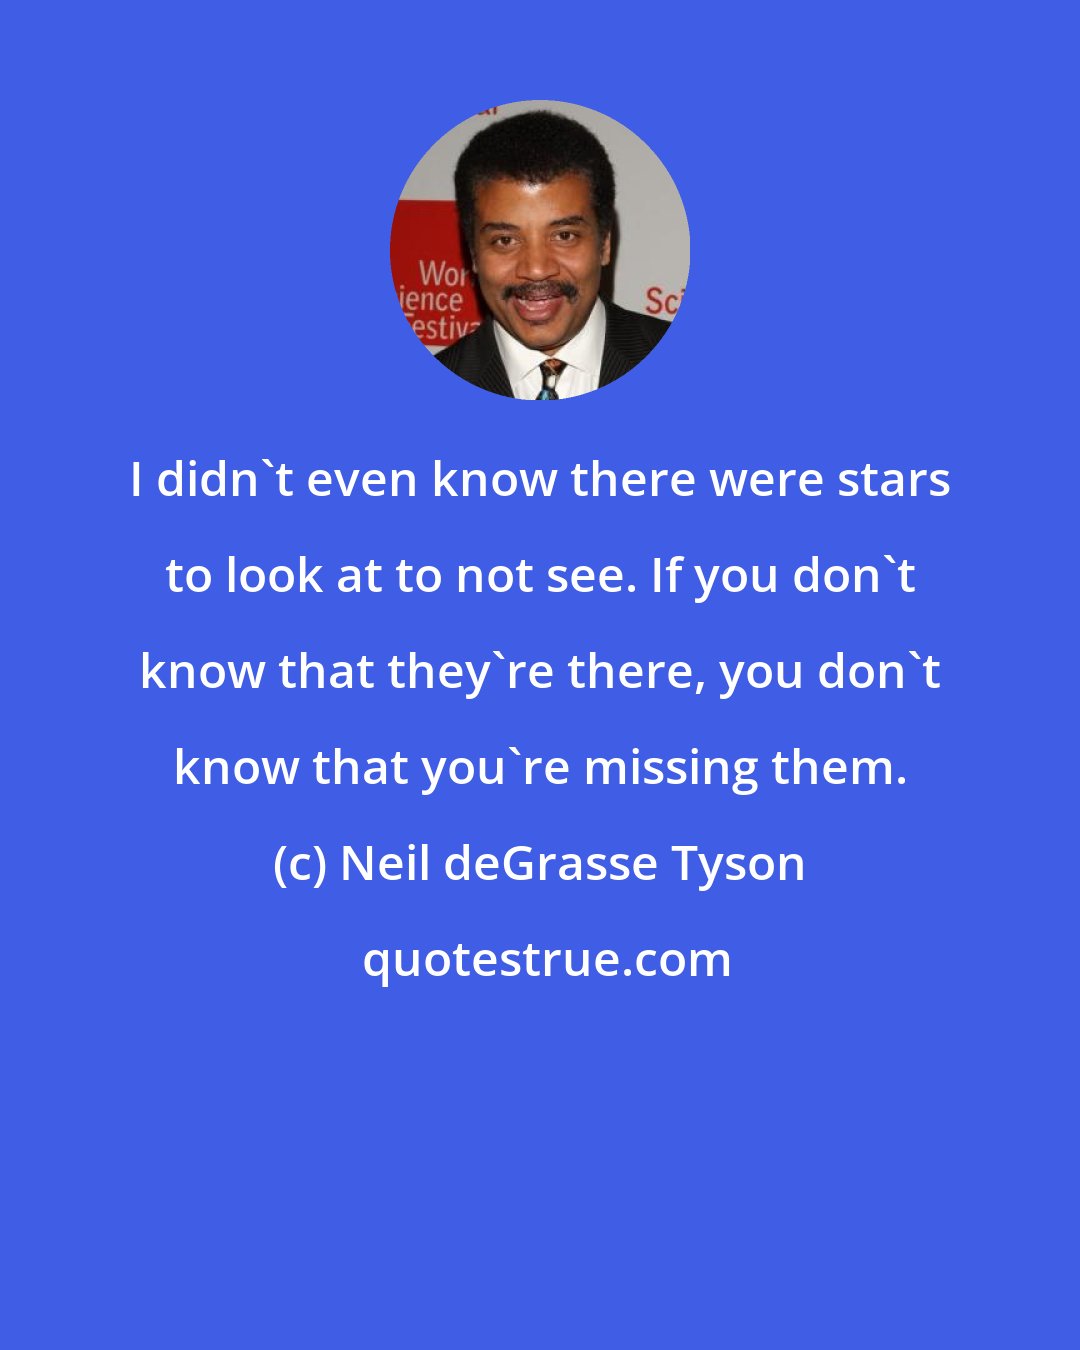 Neil deGrasse Tyson: I didn't even know there were stars to look at to not see. If you don't know that they're there, you don't know that you're missing them.